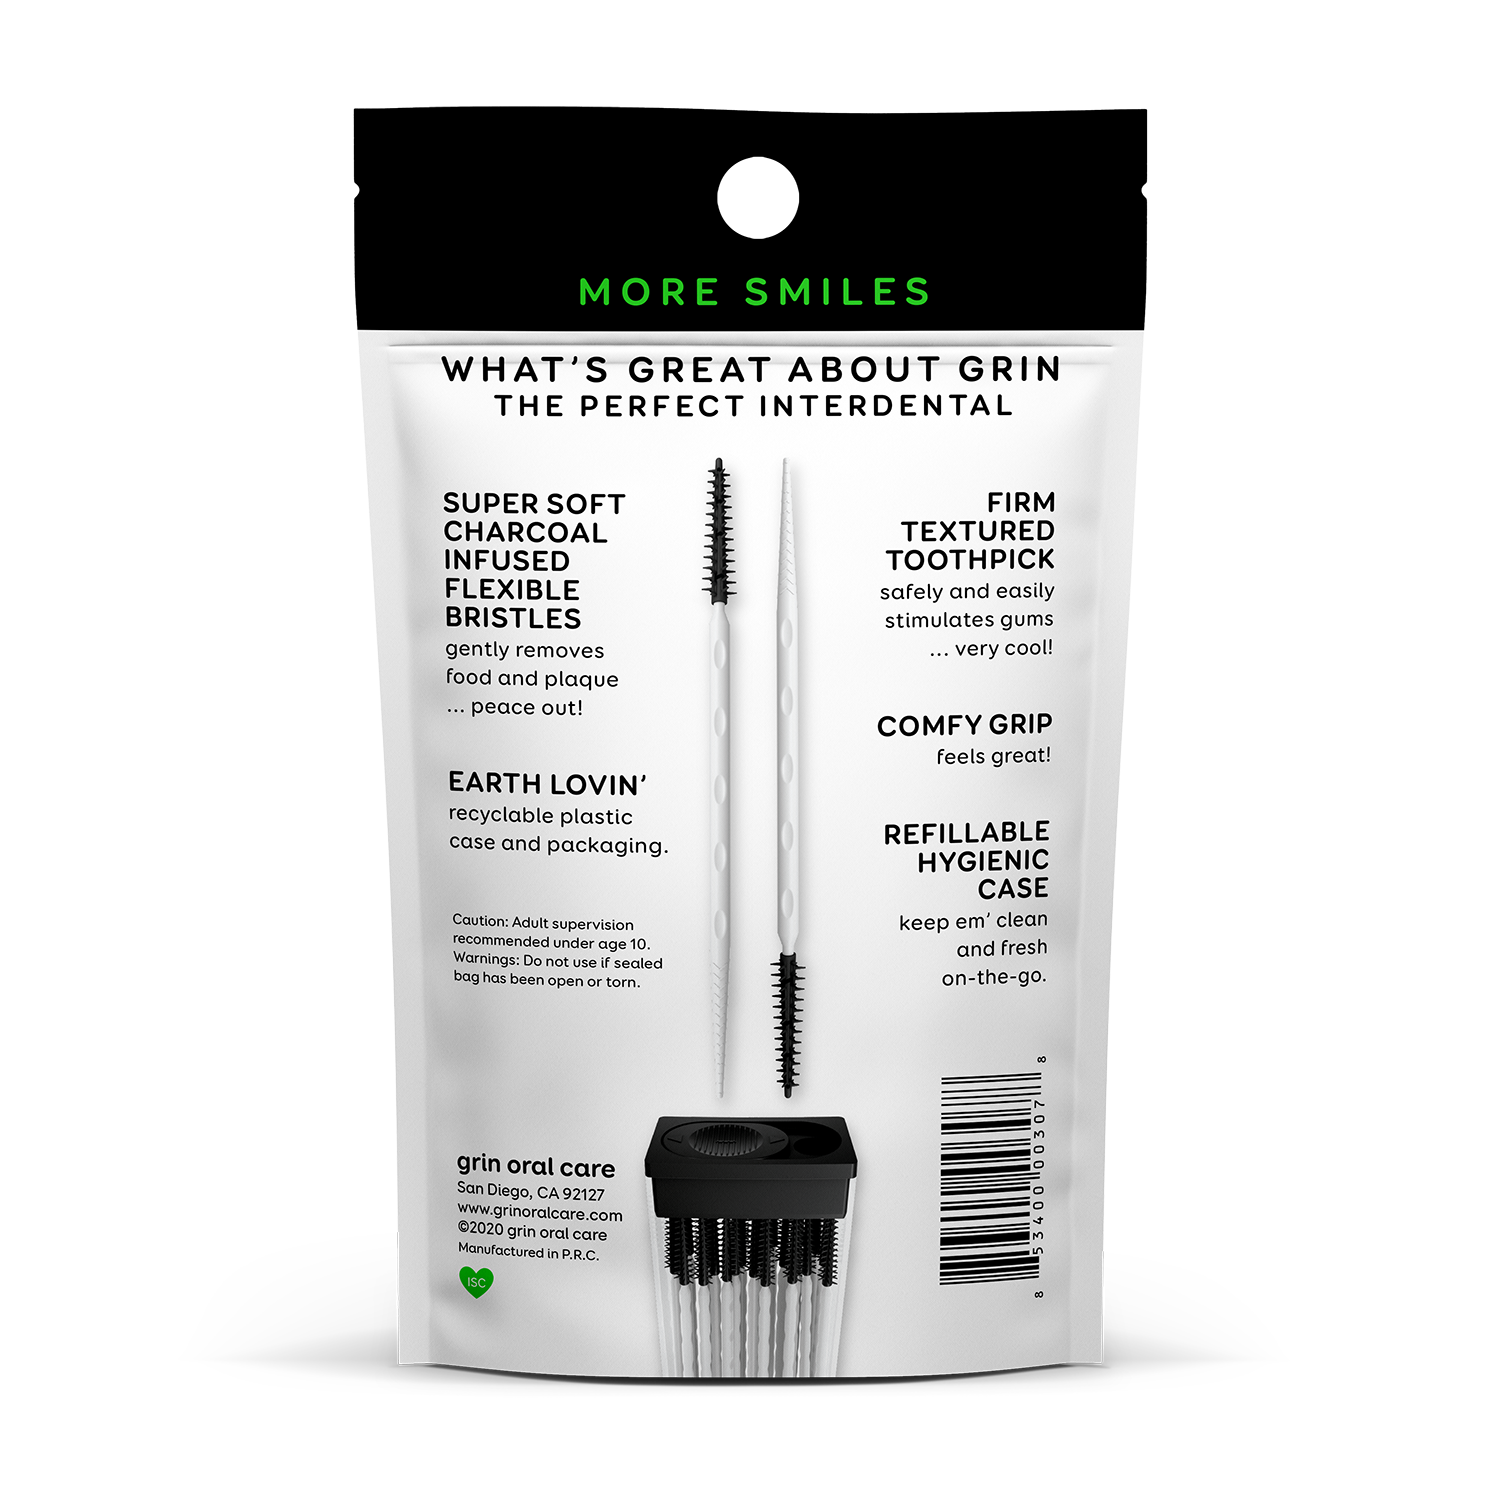 Grin Oral Care Minty Charcoal Softstx